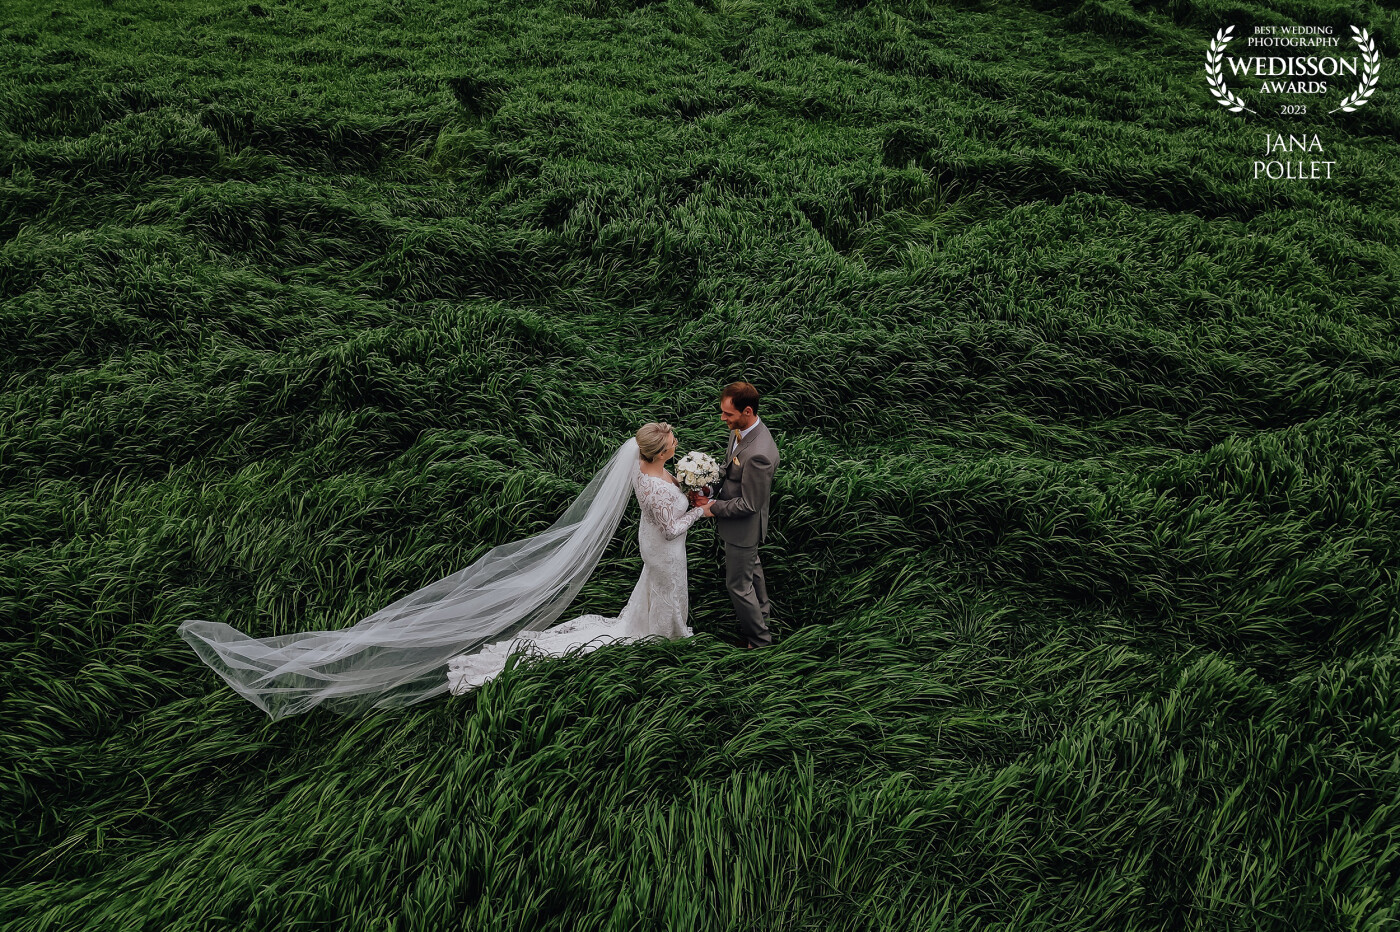 To me this photo feels like a painting, the wind in the grass creates movement, her veil is beautiful. What a beautiful romantic moment